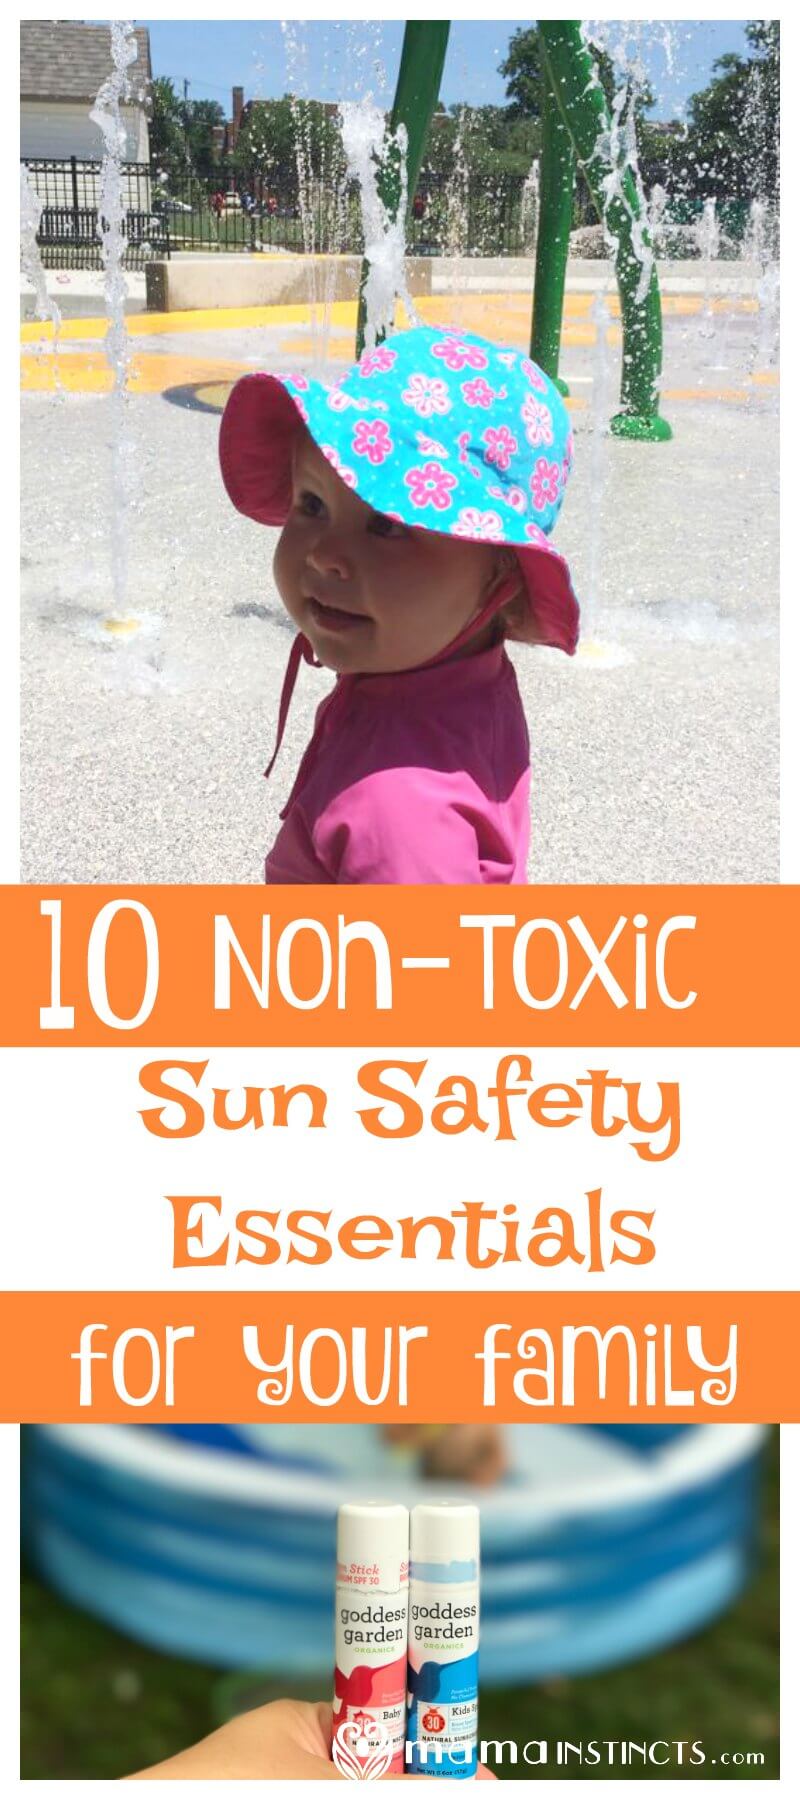 Summer is here once again which means sunscreen is advertised everywhere but did you know that conventional sunblock contains toxic chemicals? Find out what are the best practices to keep your children away from toxic chemicals during the summer time, while still protecting from the sun. From non-toxic sunscreen to UV blocking shirts and more.